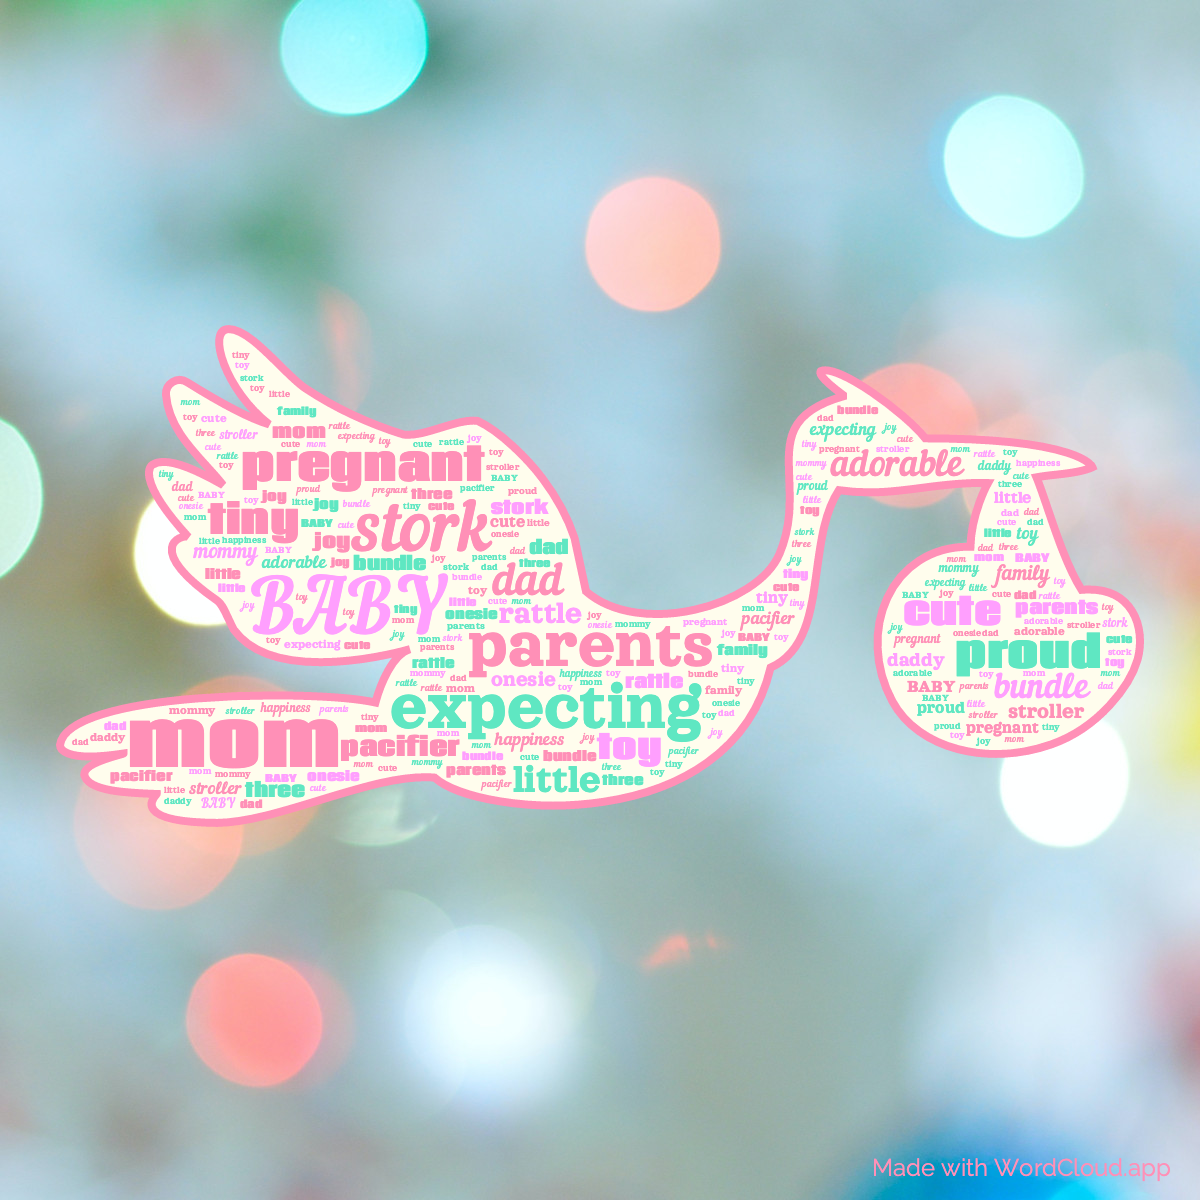 A word cloud in the shape of a stork carrying a baby bundle, with words such as "baby", "parents", "expecting" and "adorable".